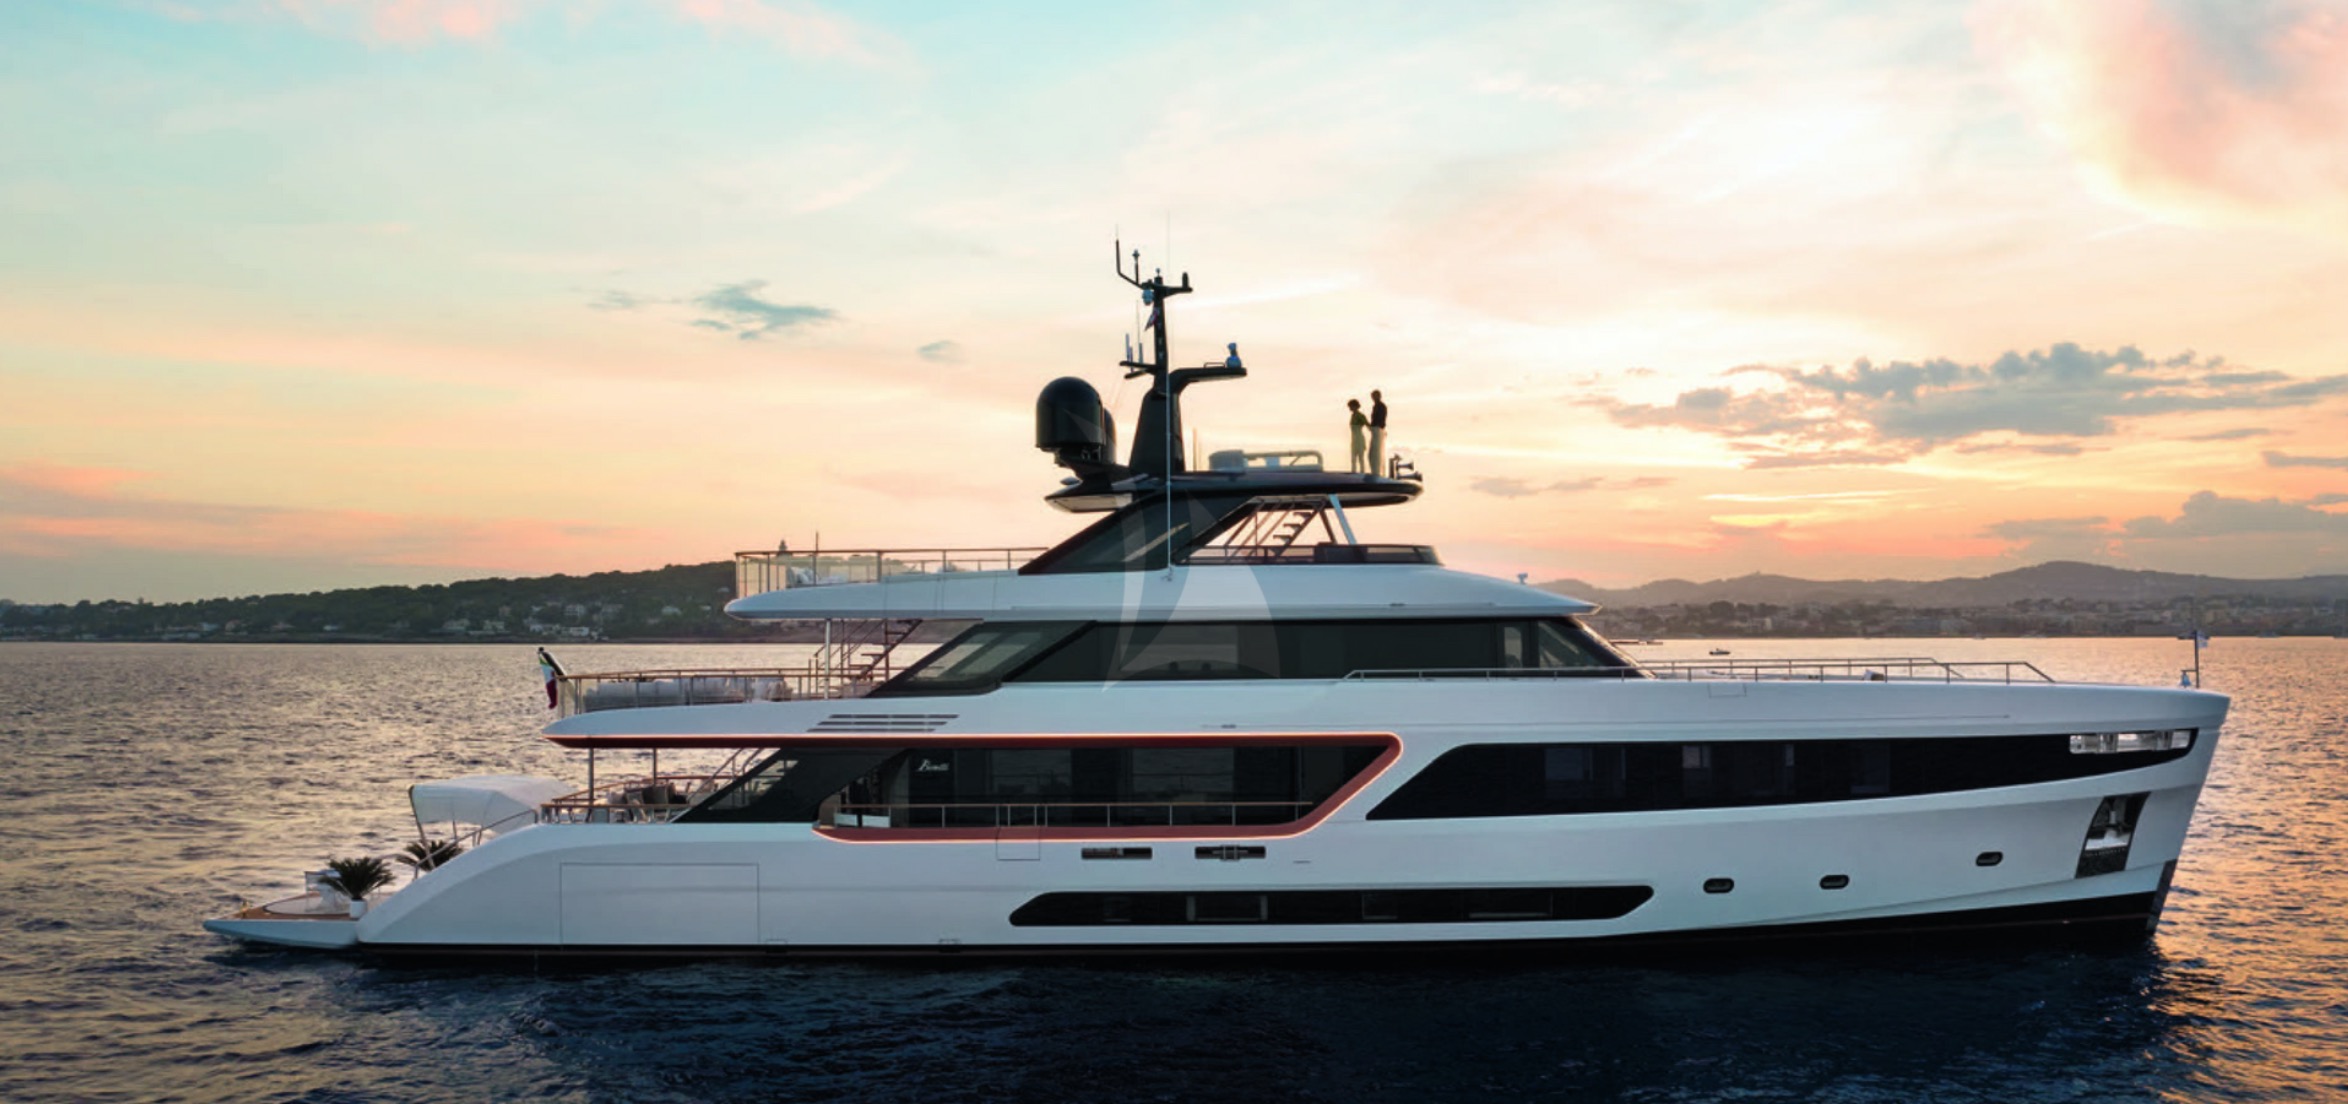 Alluria Yacht For Charter